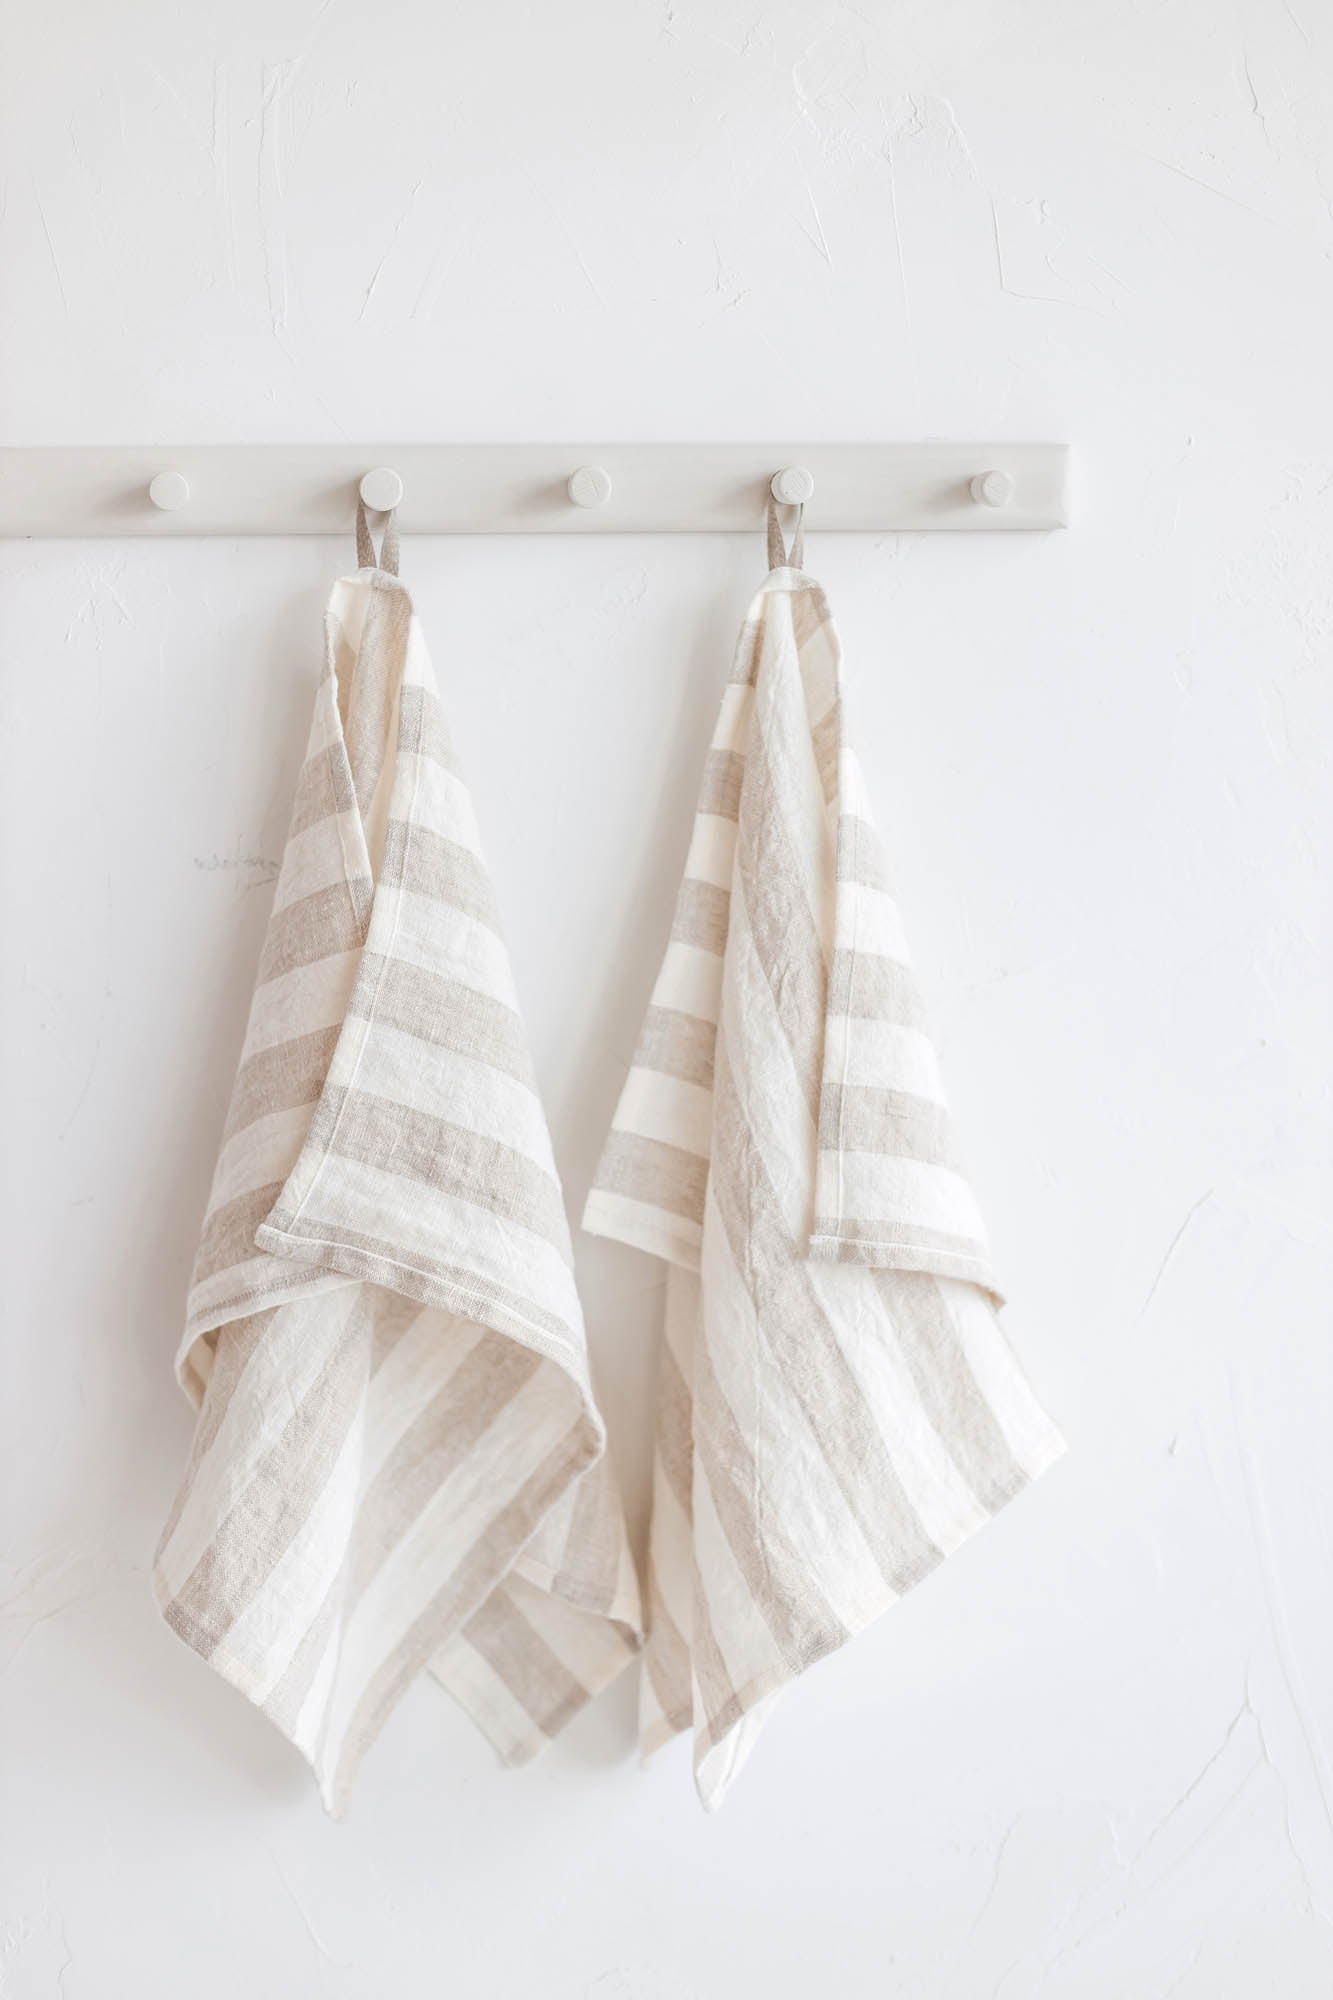 Linen bath towels with white/natural stripes